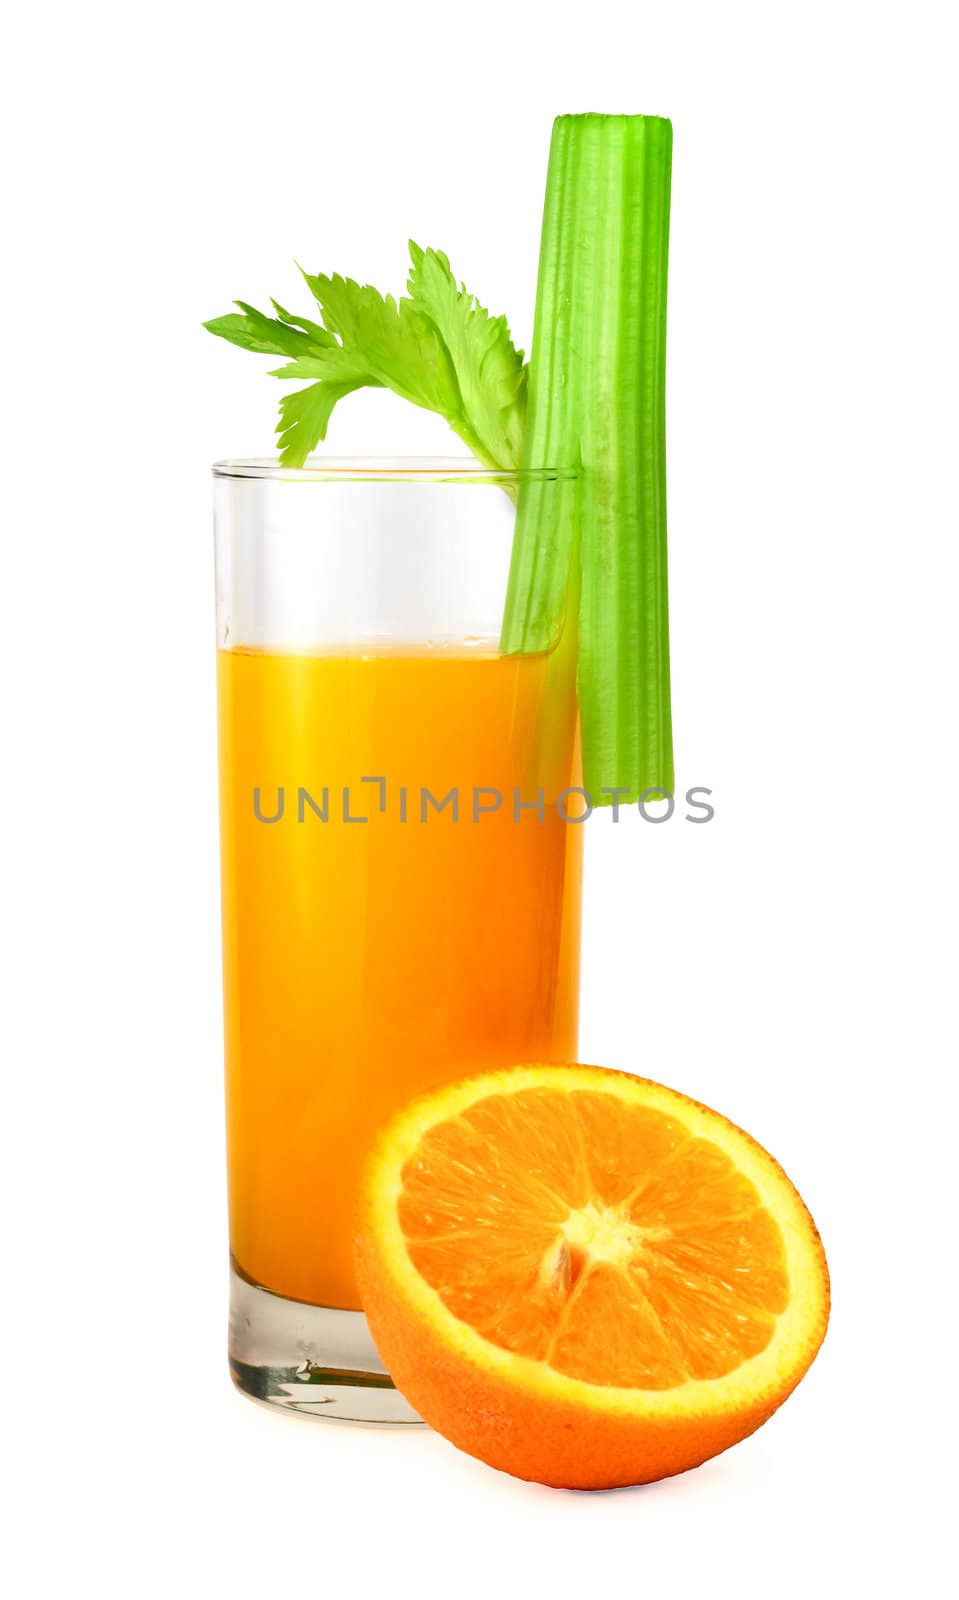 Juice and half of orange decorated with celery on white